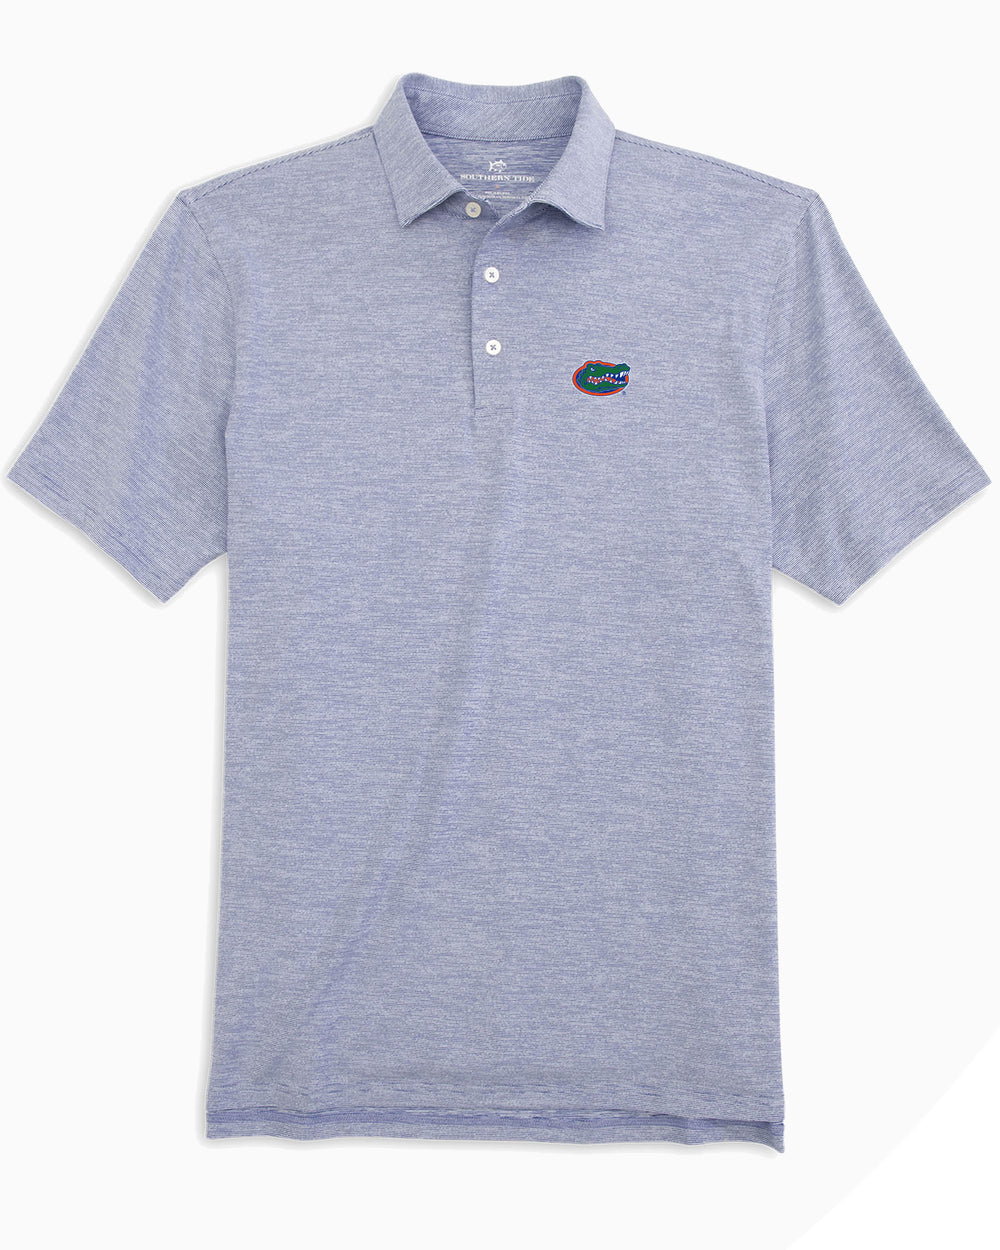 The front view of the Florida Gators Driver Spacedye Polo Shirt by Southern Tide - University Blue